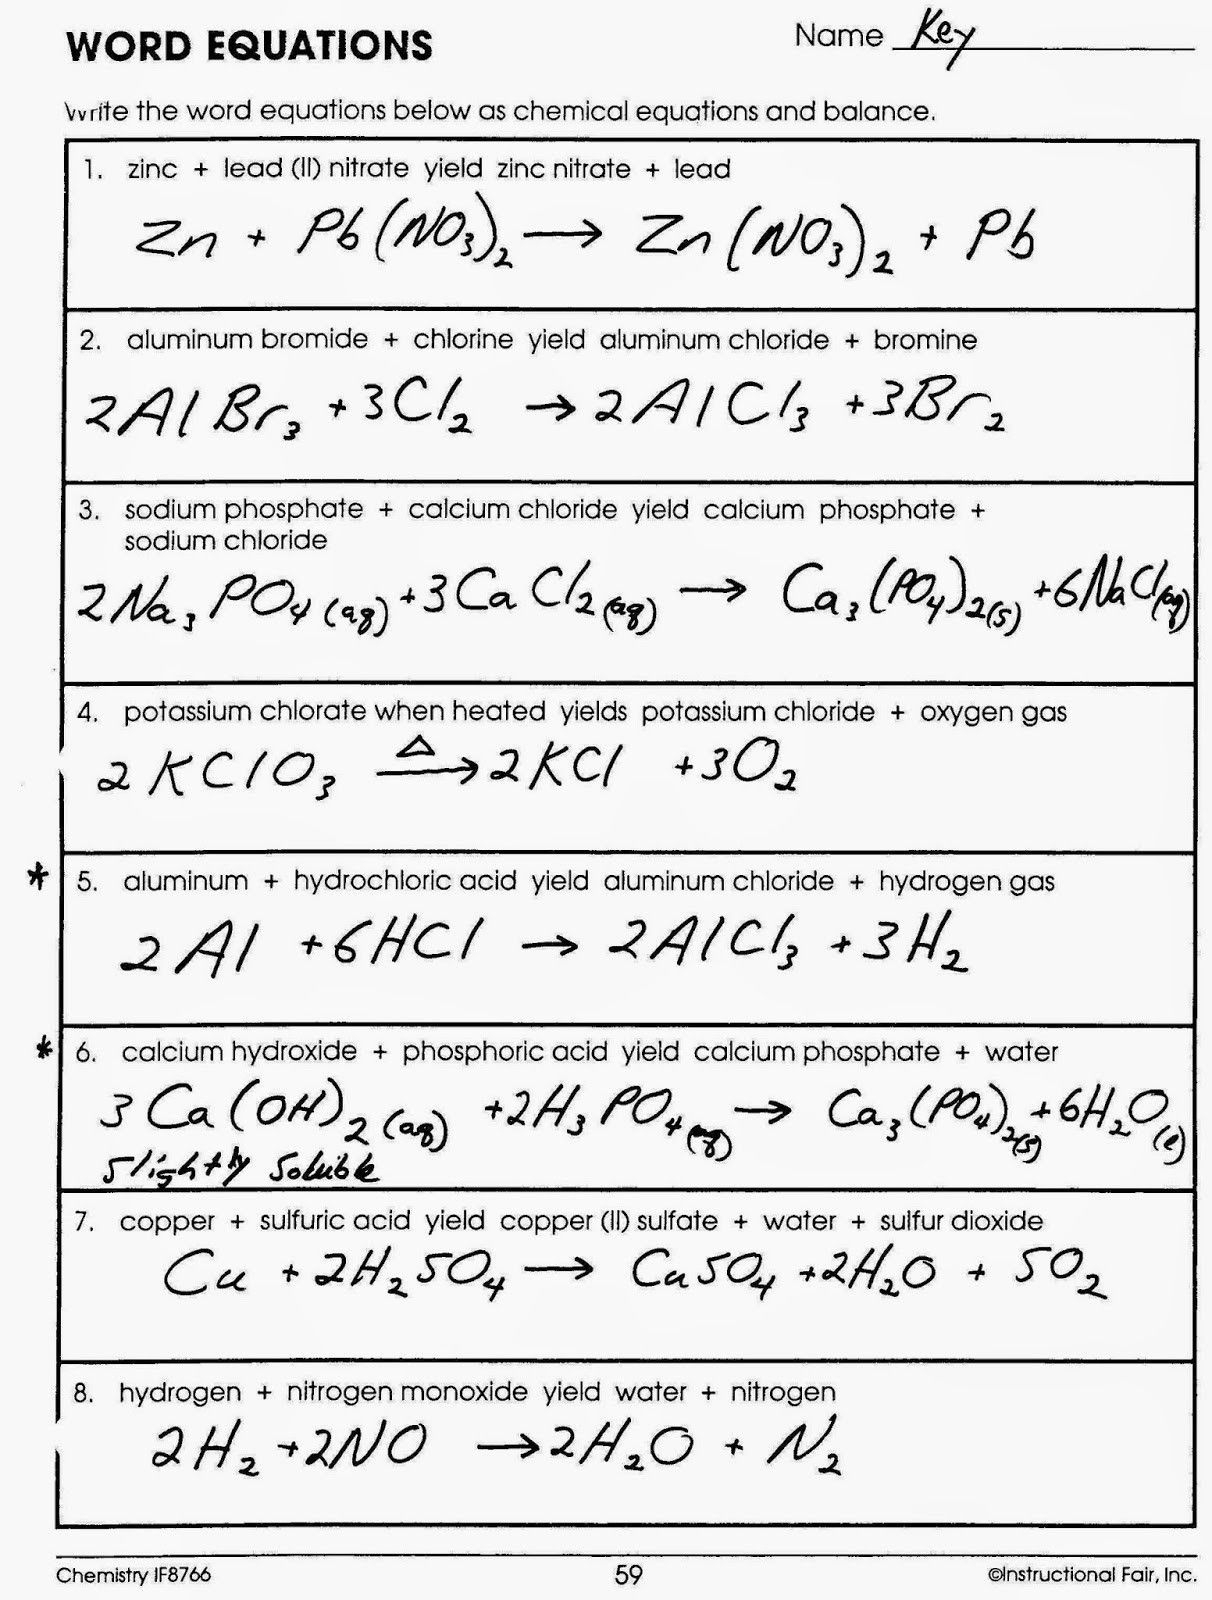 balancing chemical equations word problems calculator